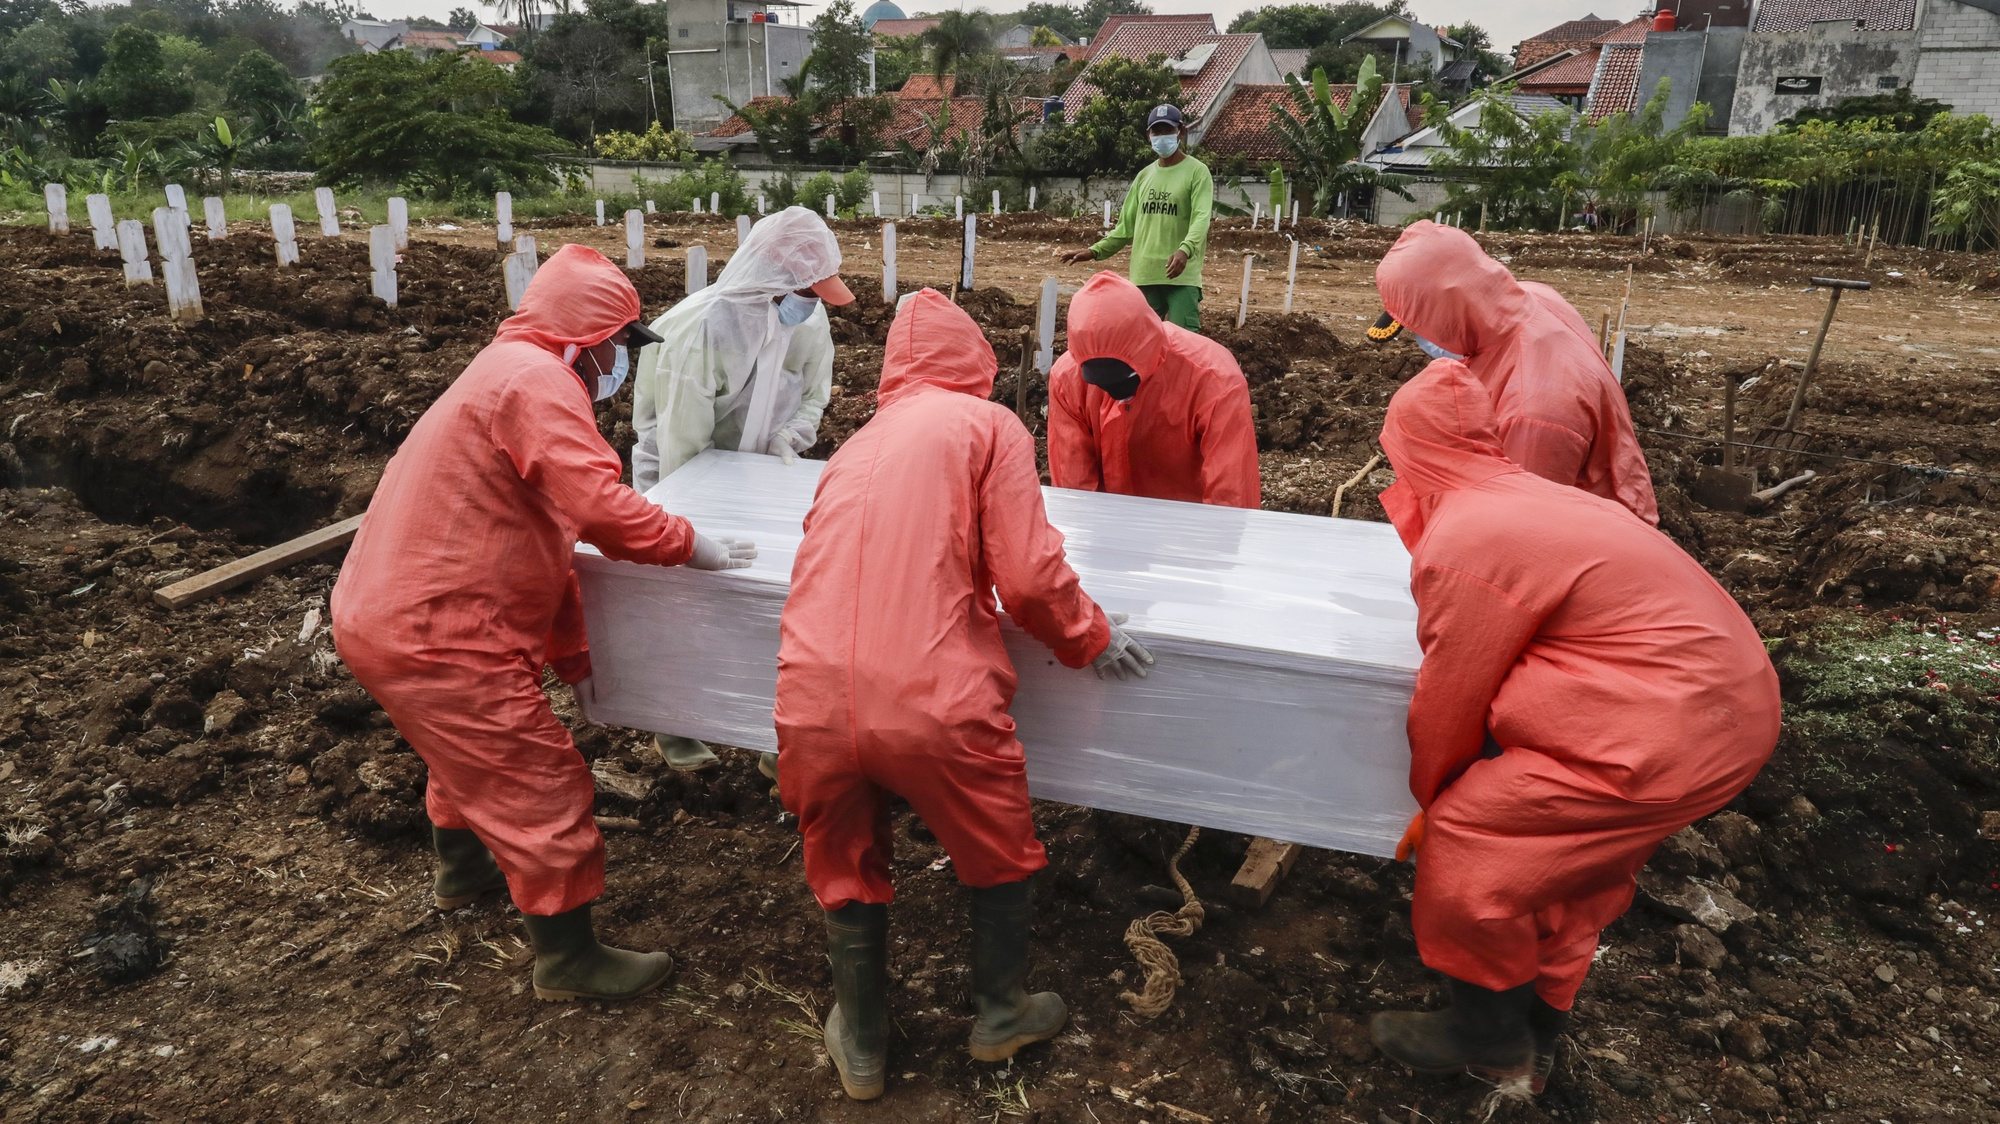 epa09098373 Workers clad in hazmat suits carry the coffin containing the body of a COVID-19 victim during a funeral at Srengseng Sawah cemetery in Jakarta, Indonesia, 26 March 2021. Indonesia is one of the countries worst hit by COVID-19 in Asia, with more than one million cases and more than forty thousands deaths since the pandemic began.  EPA/MAST IRHAM